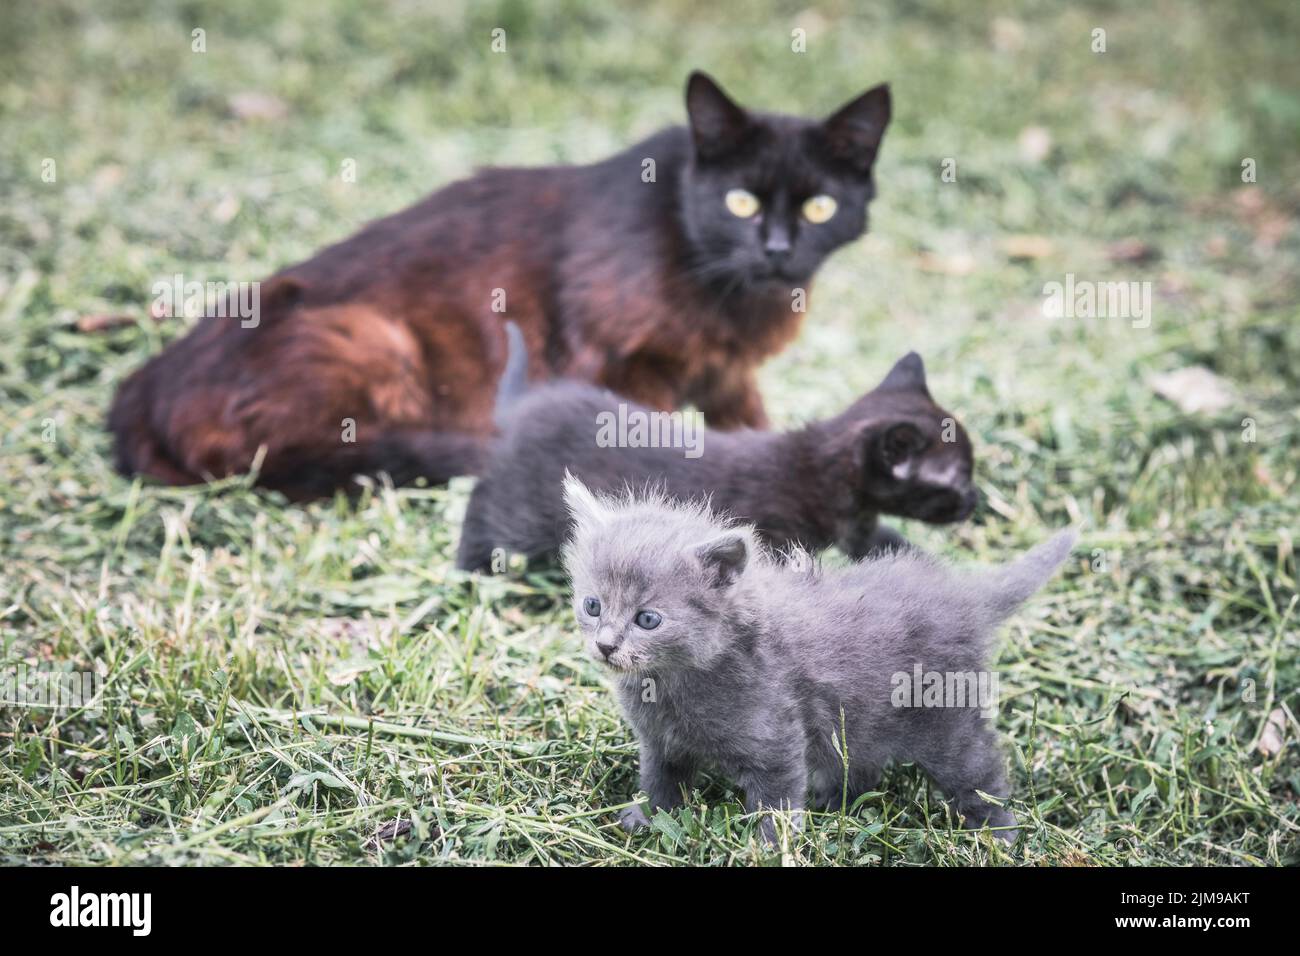 Cat with her two kittens together in the garden Stock Photo